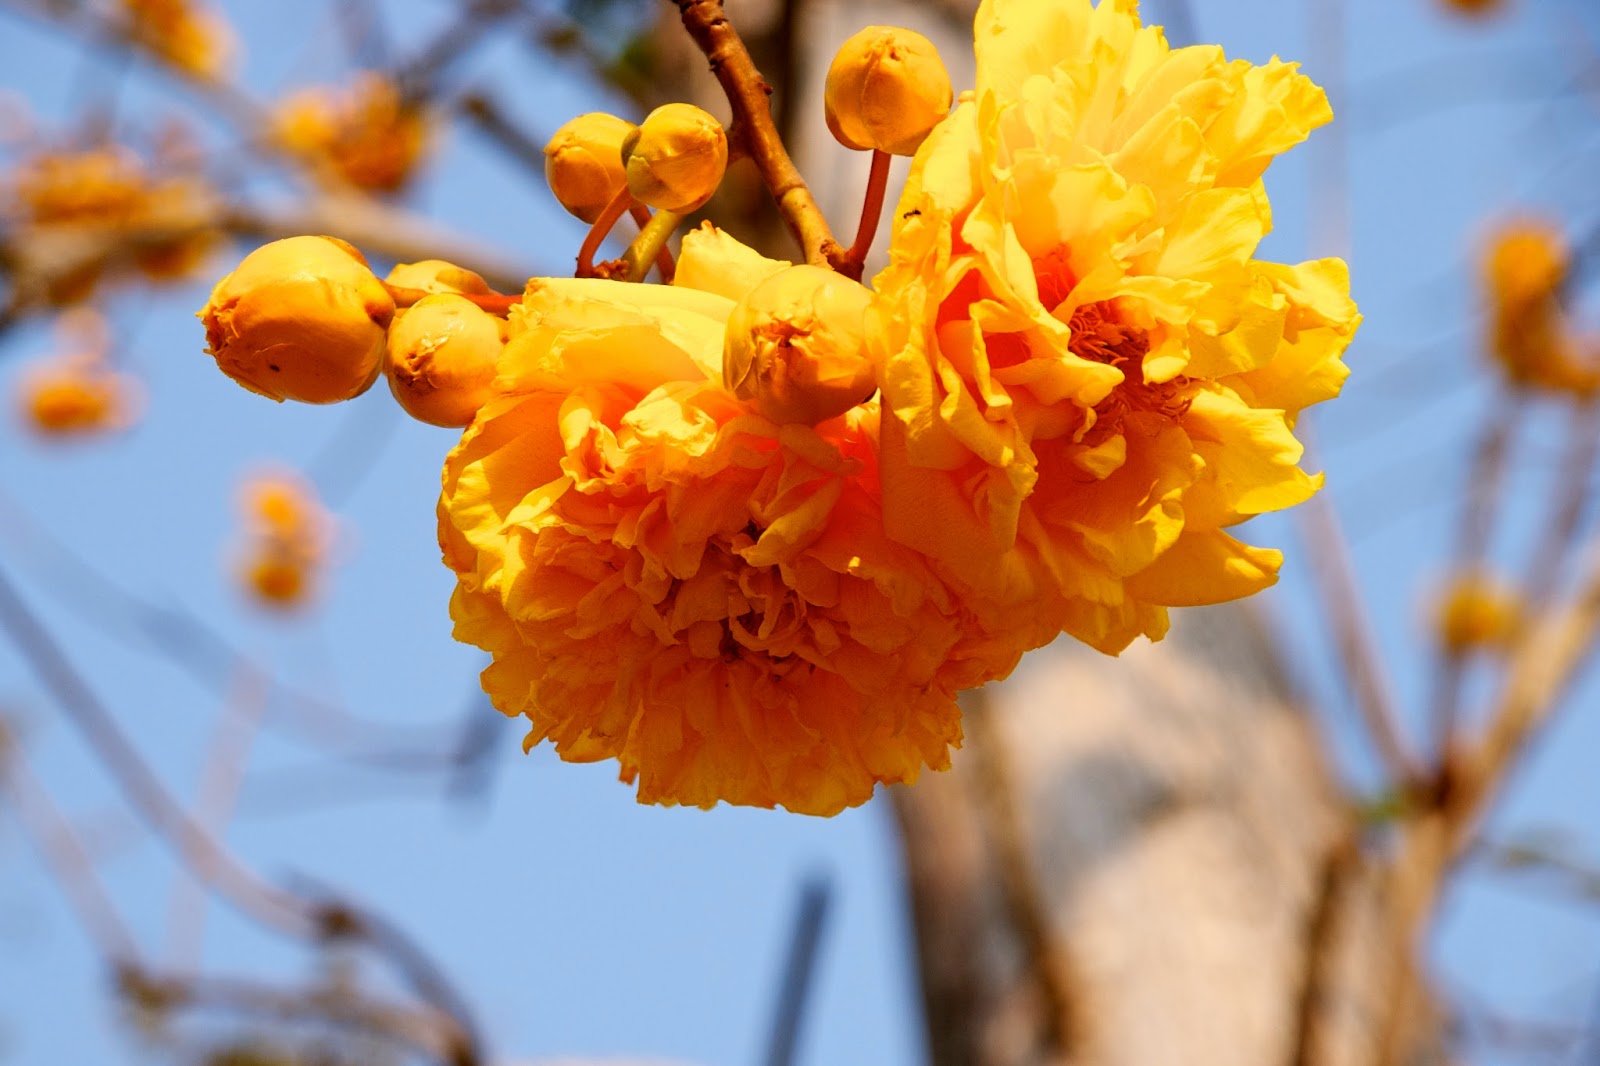 ChiangMai Daily Photo With Mary: Friday Flowers - A Golden Buttercup Tree